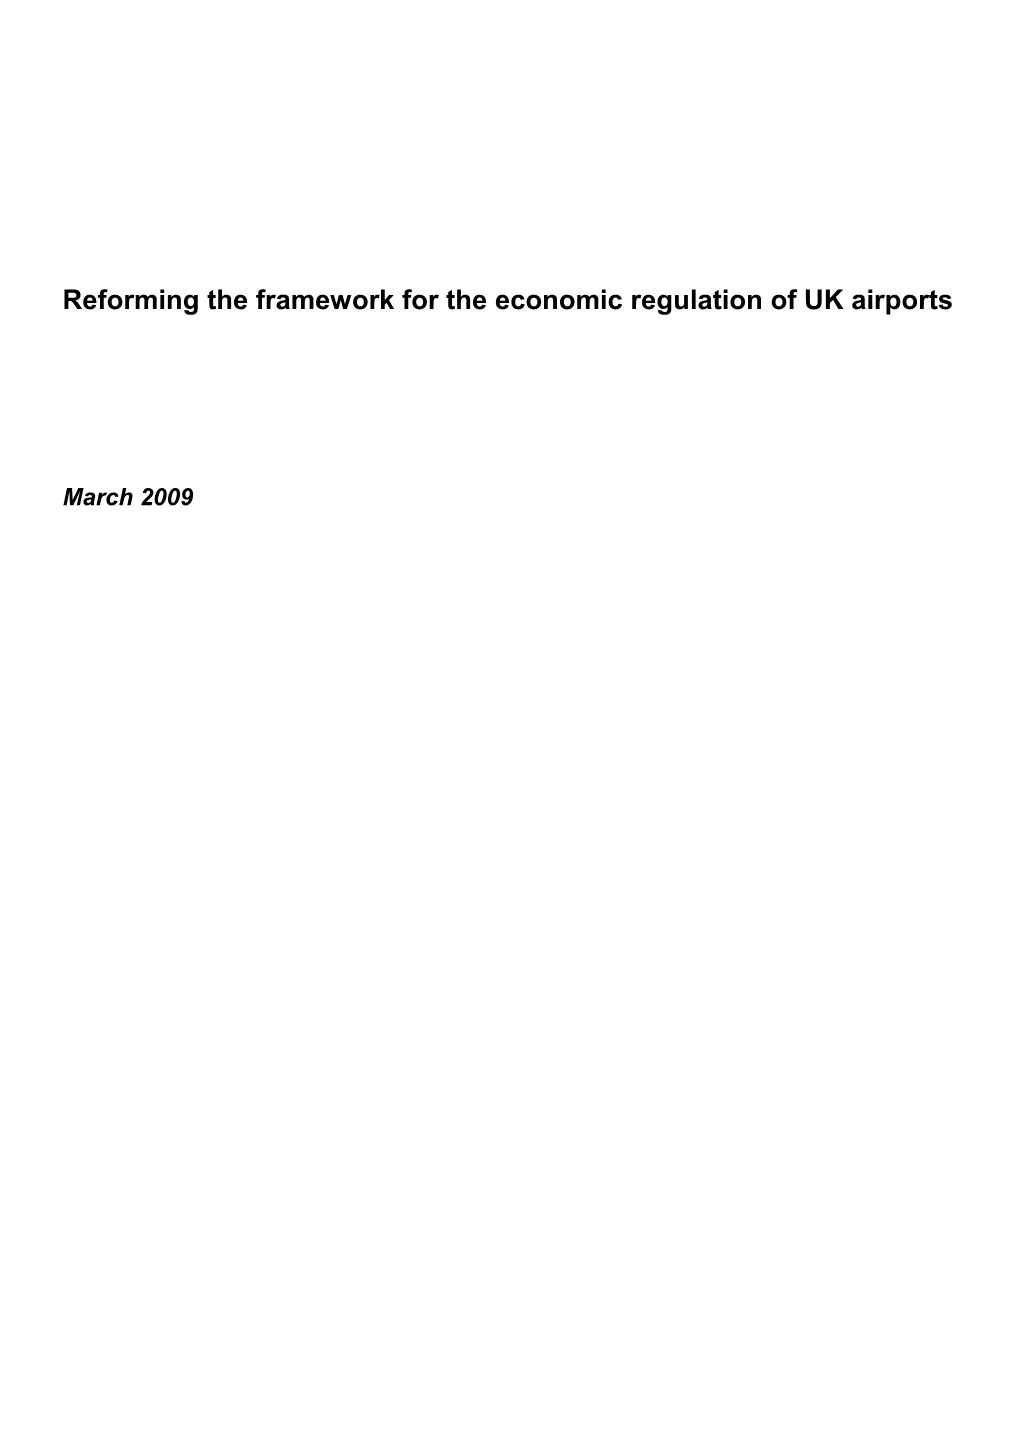 Reforming the Framework for the Economic Regulation of UK Airports